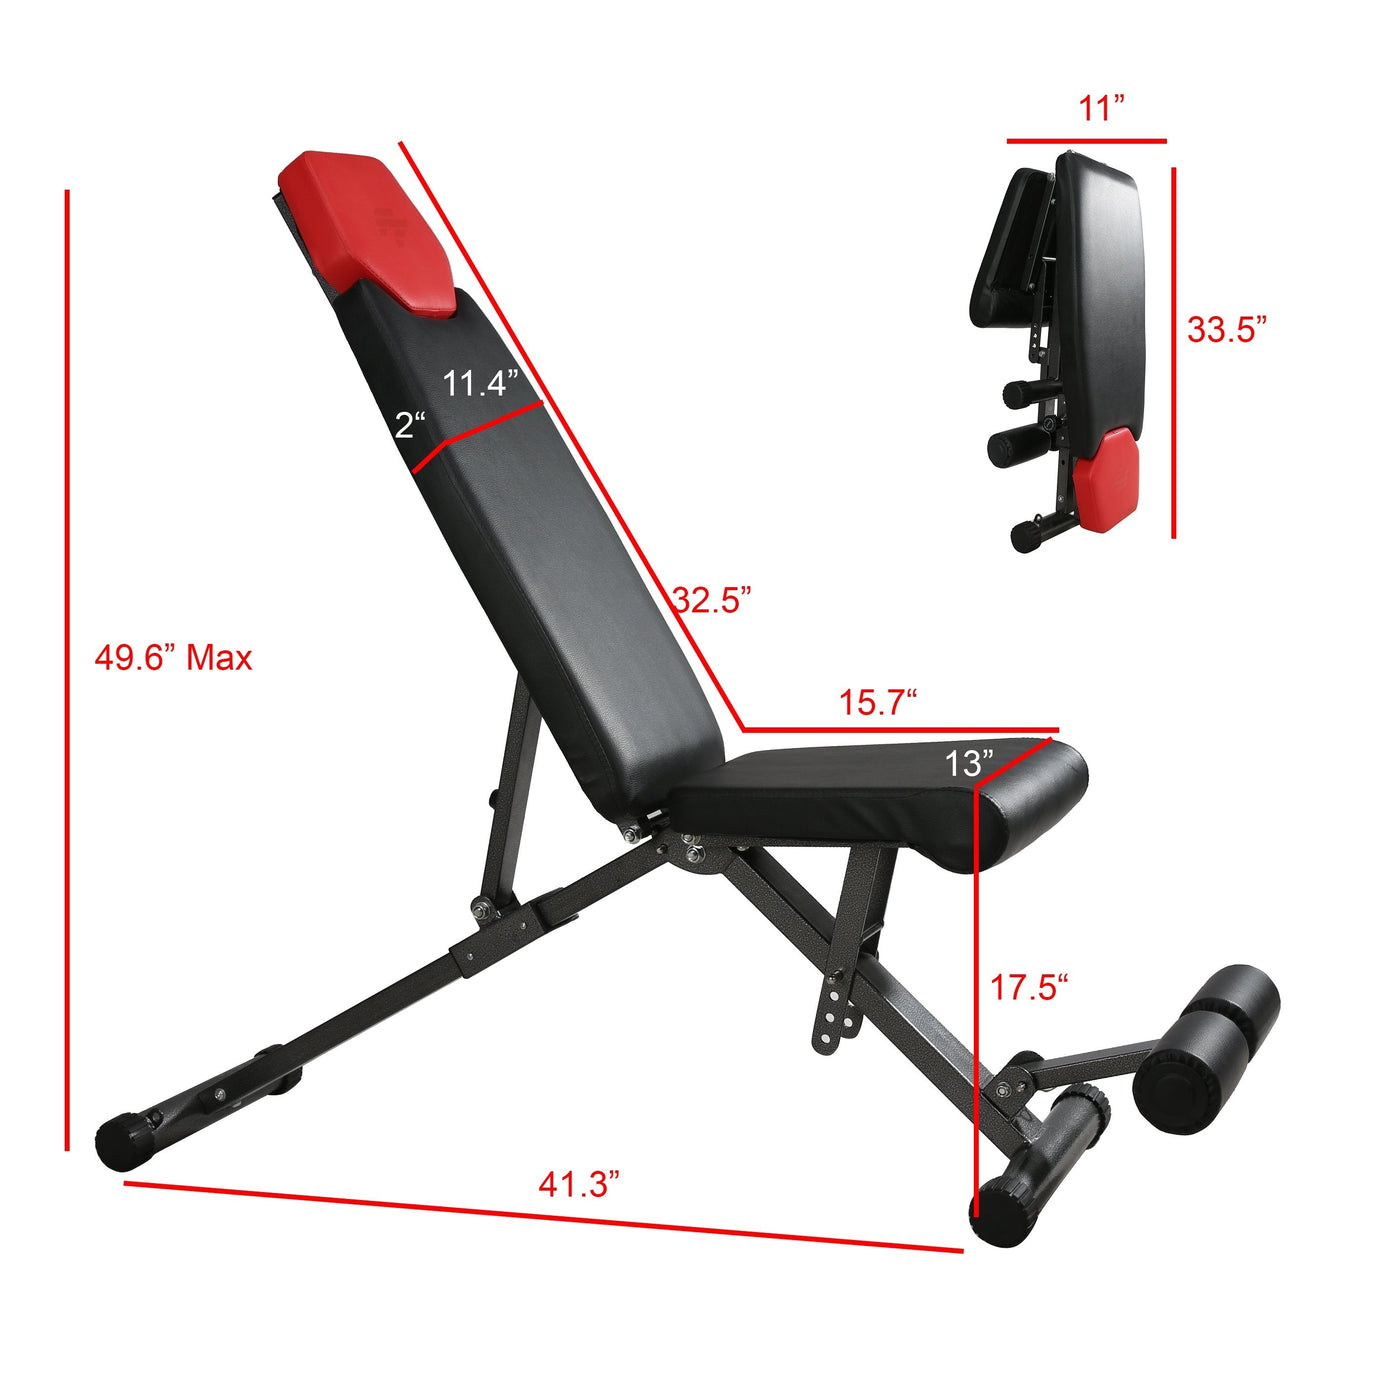 5-in-1 Adjustable Weight Bench by Finer Form